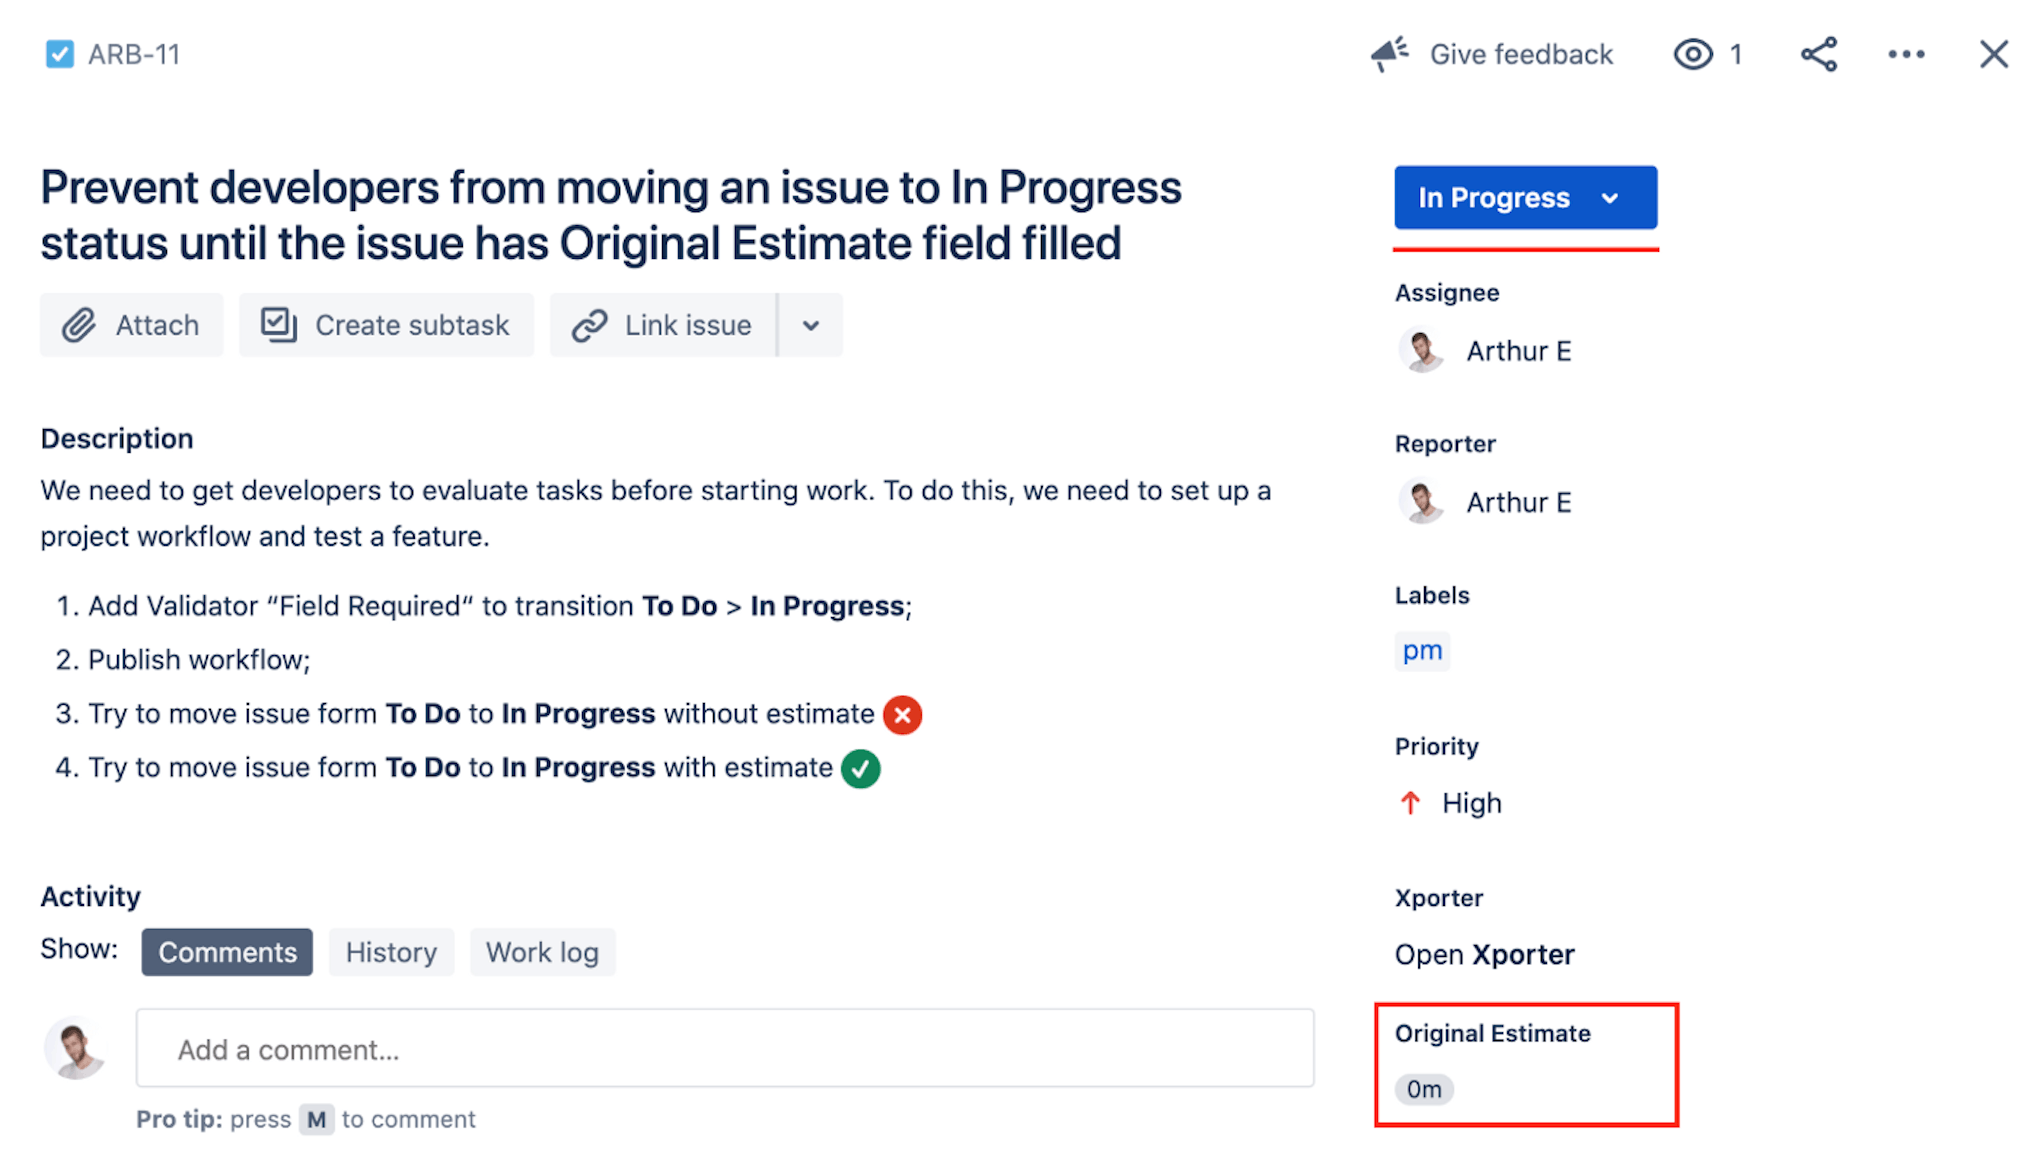 Prevent developers from moving an issue to the In Progress status until the issue has the Original Estimate field filled.